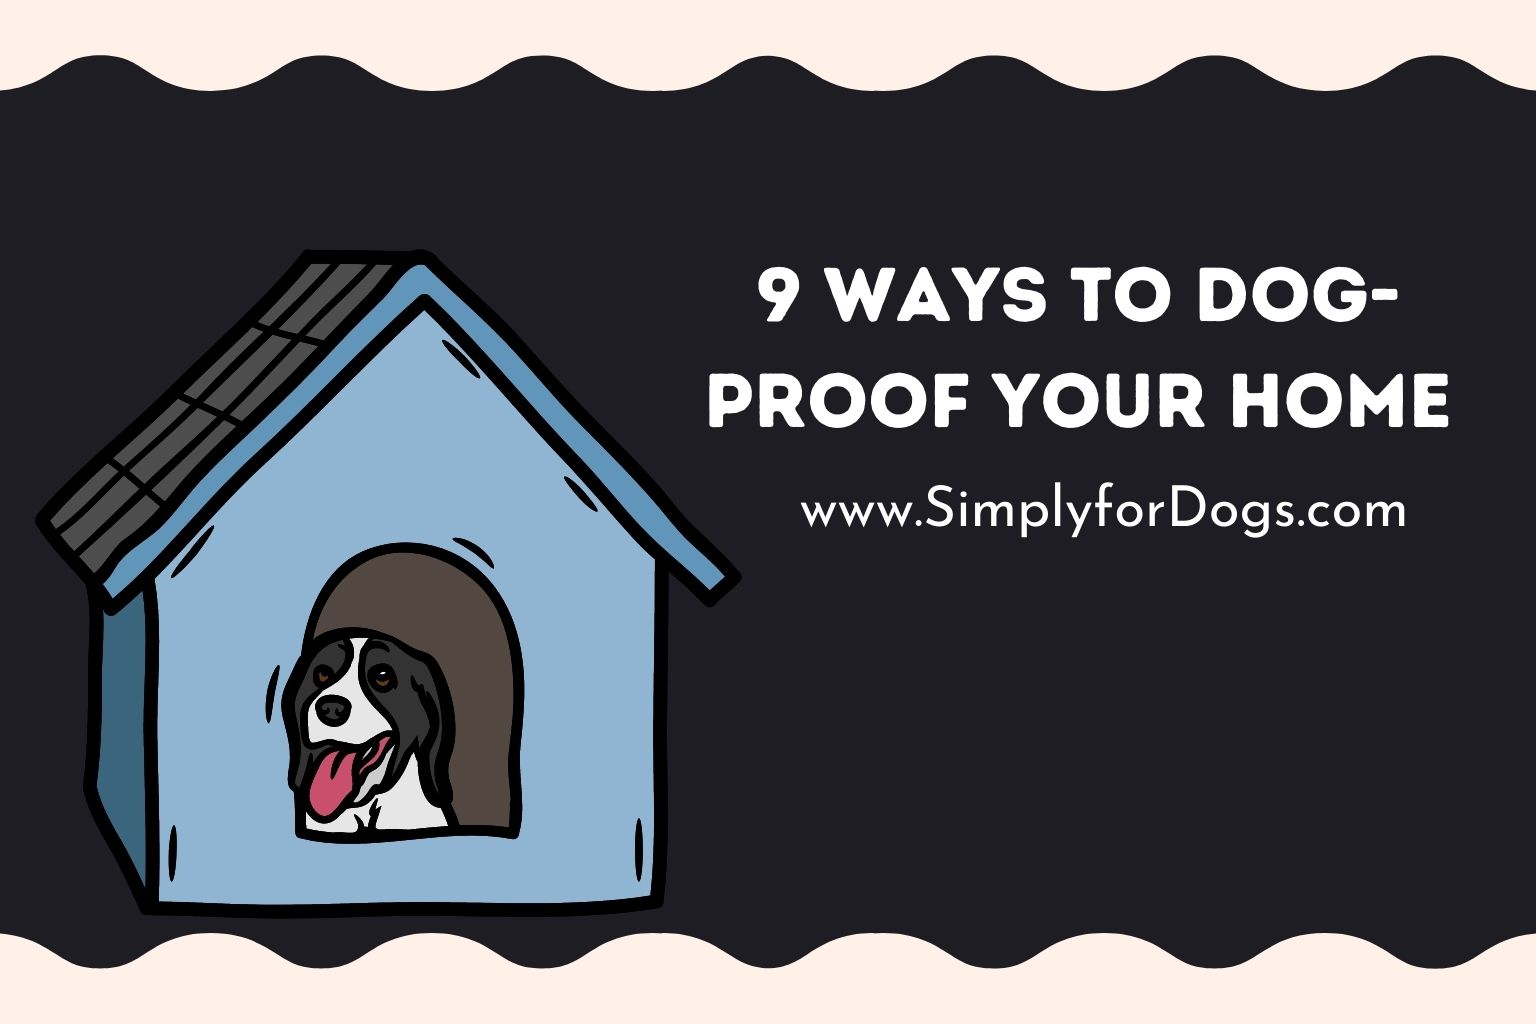 9 Ways to Dog-Proof Your Home